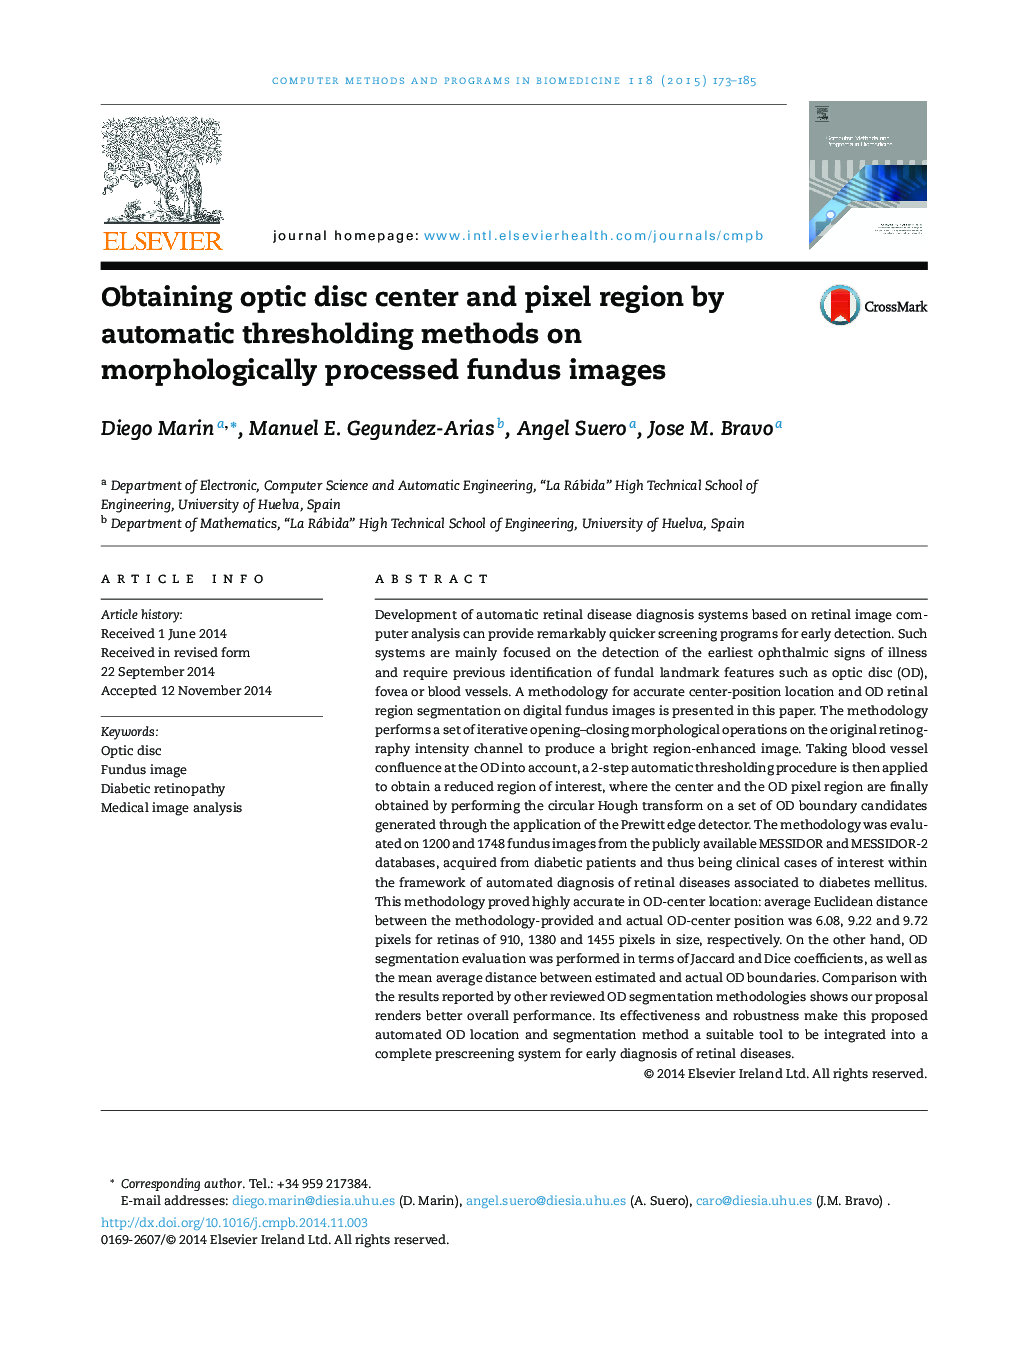 Obtaining optic disc center and pixel region by automatic thresholding methods on morphologically processed fundus images